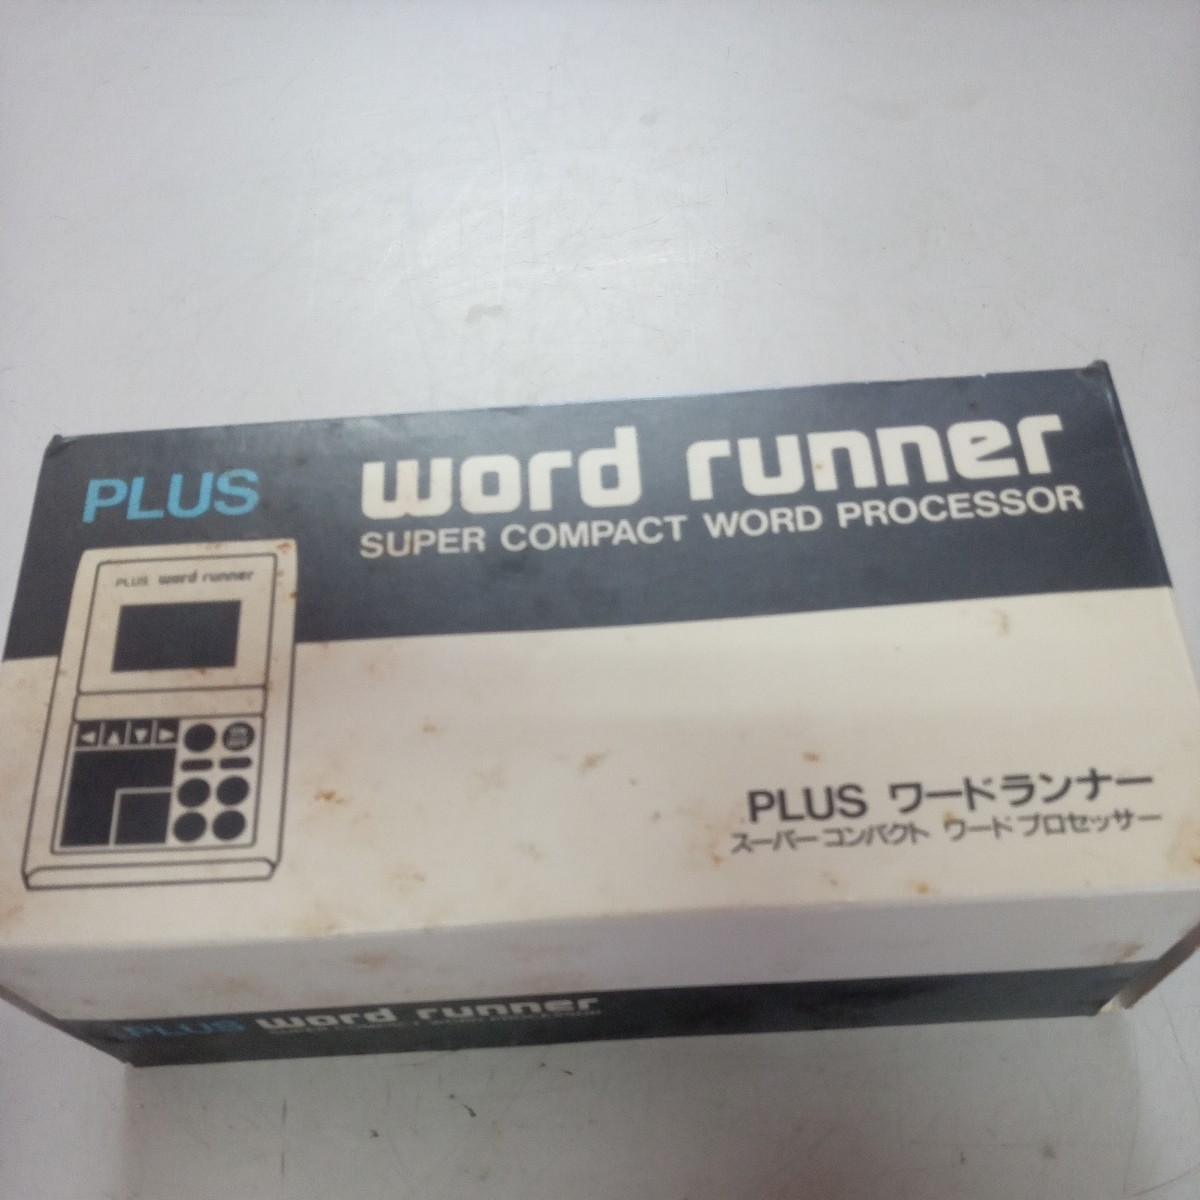 PLUS word Runner SUPER COMPACT WORD PROCESSOR word processor present condition goods ⑦